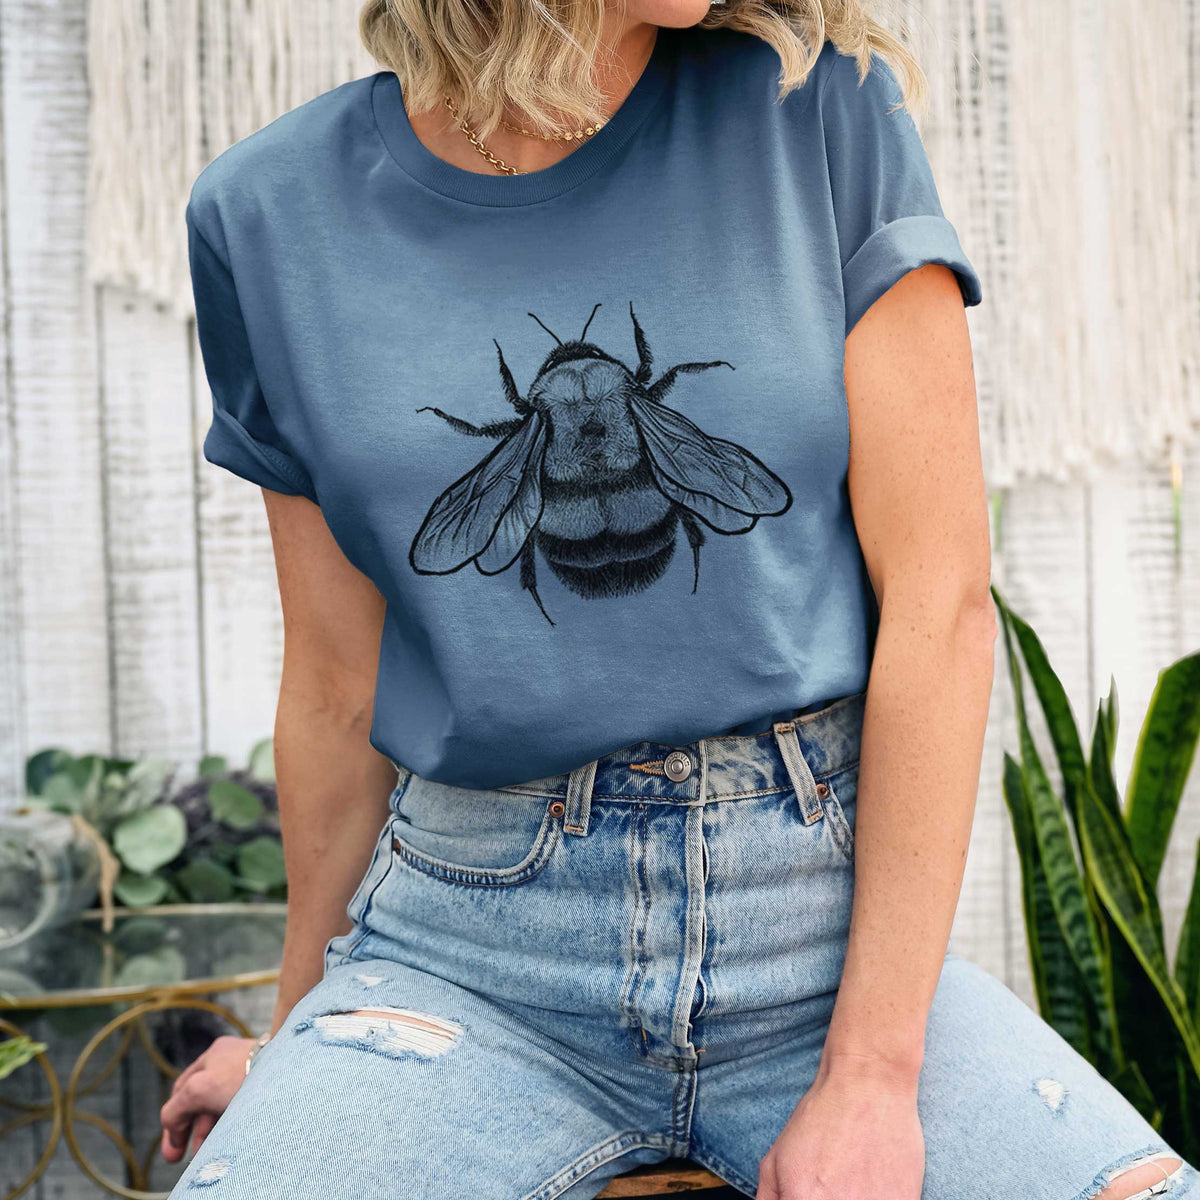 Bombus Affinis - Rusty-Patched Bumble Bee - Lightweight 100% Cotton Unisex Crewneck